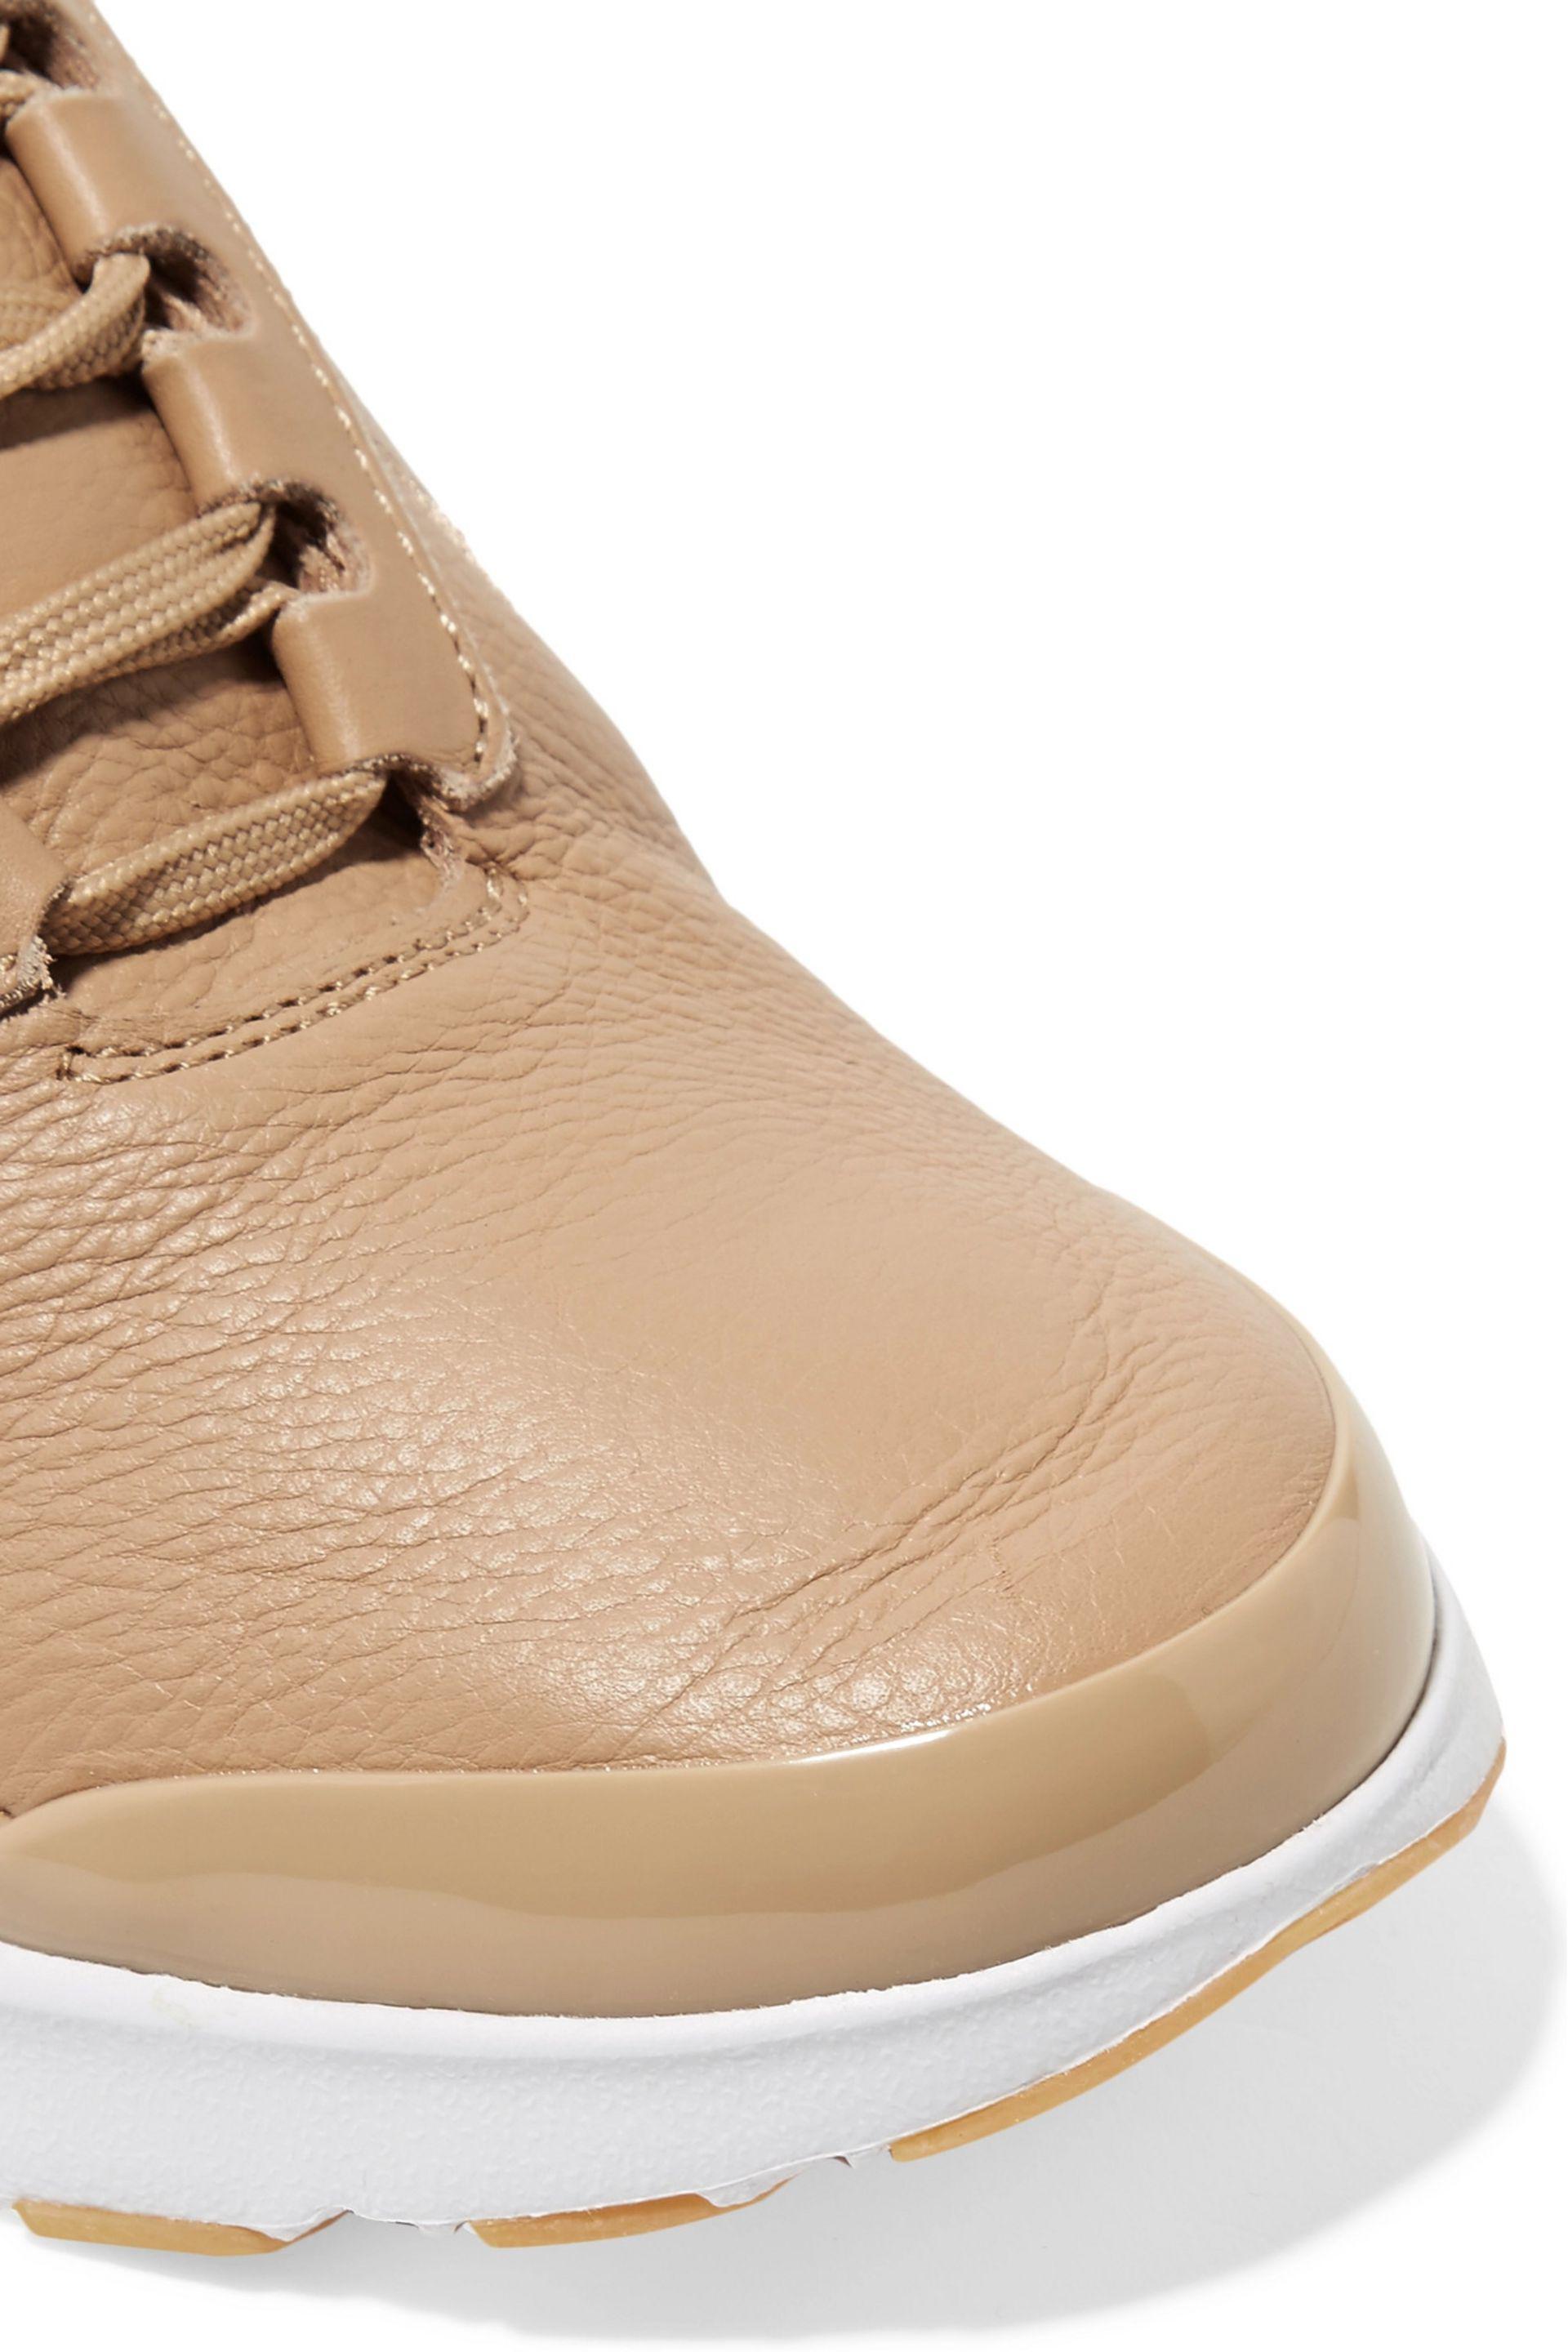 Nike Air Max Jewell Lx Leather And Tortoiseshell Plastic Sneakers in Beige  (Natural) | Lyst